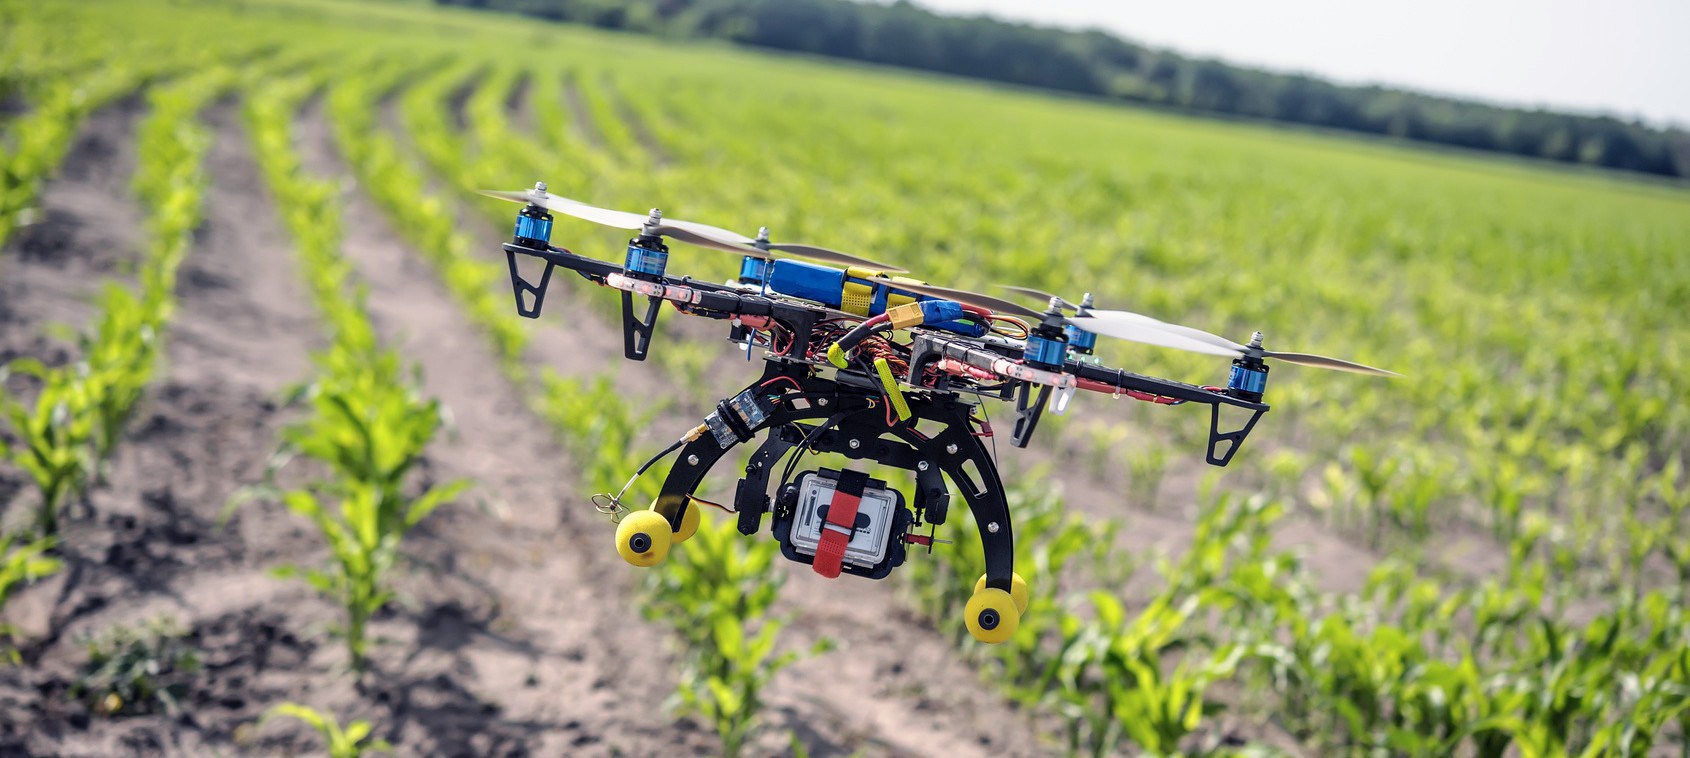 use-of-drones-in-agriculture-banner.jpg